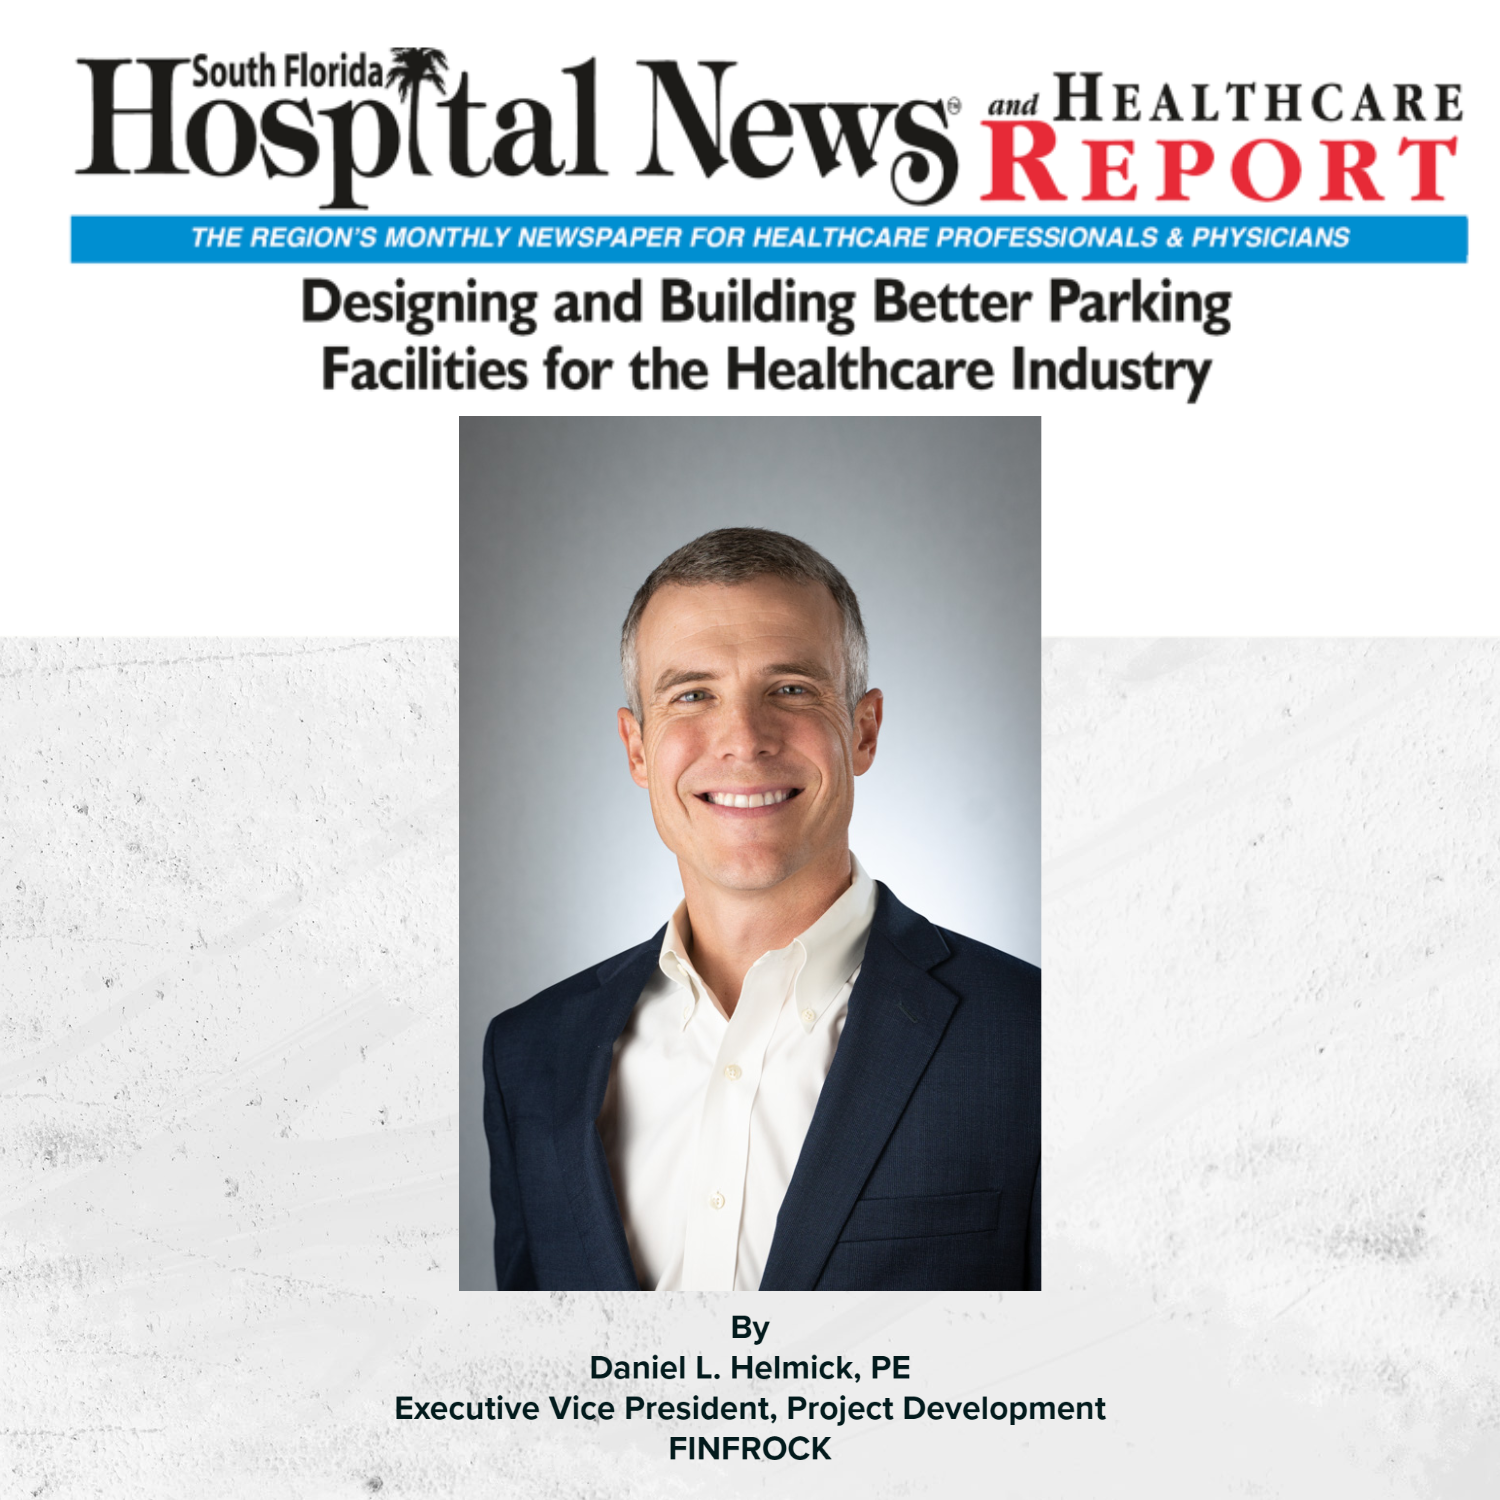 Designing and Building Better Parking Facilities for the Healthcare Industry